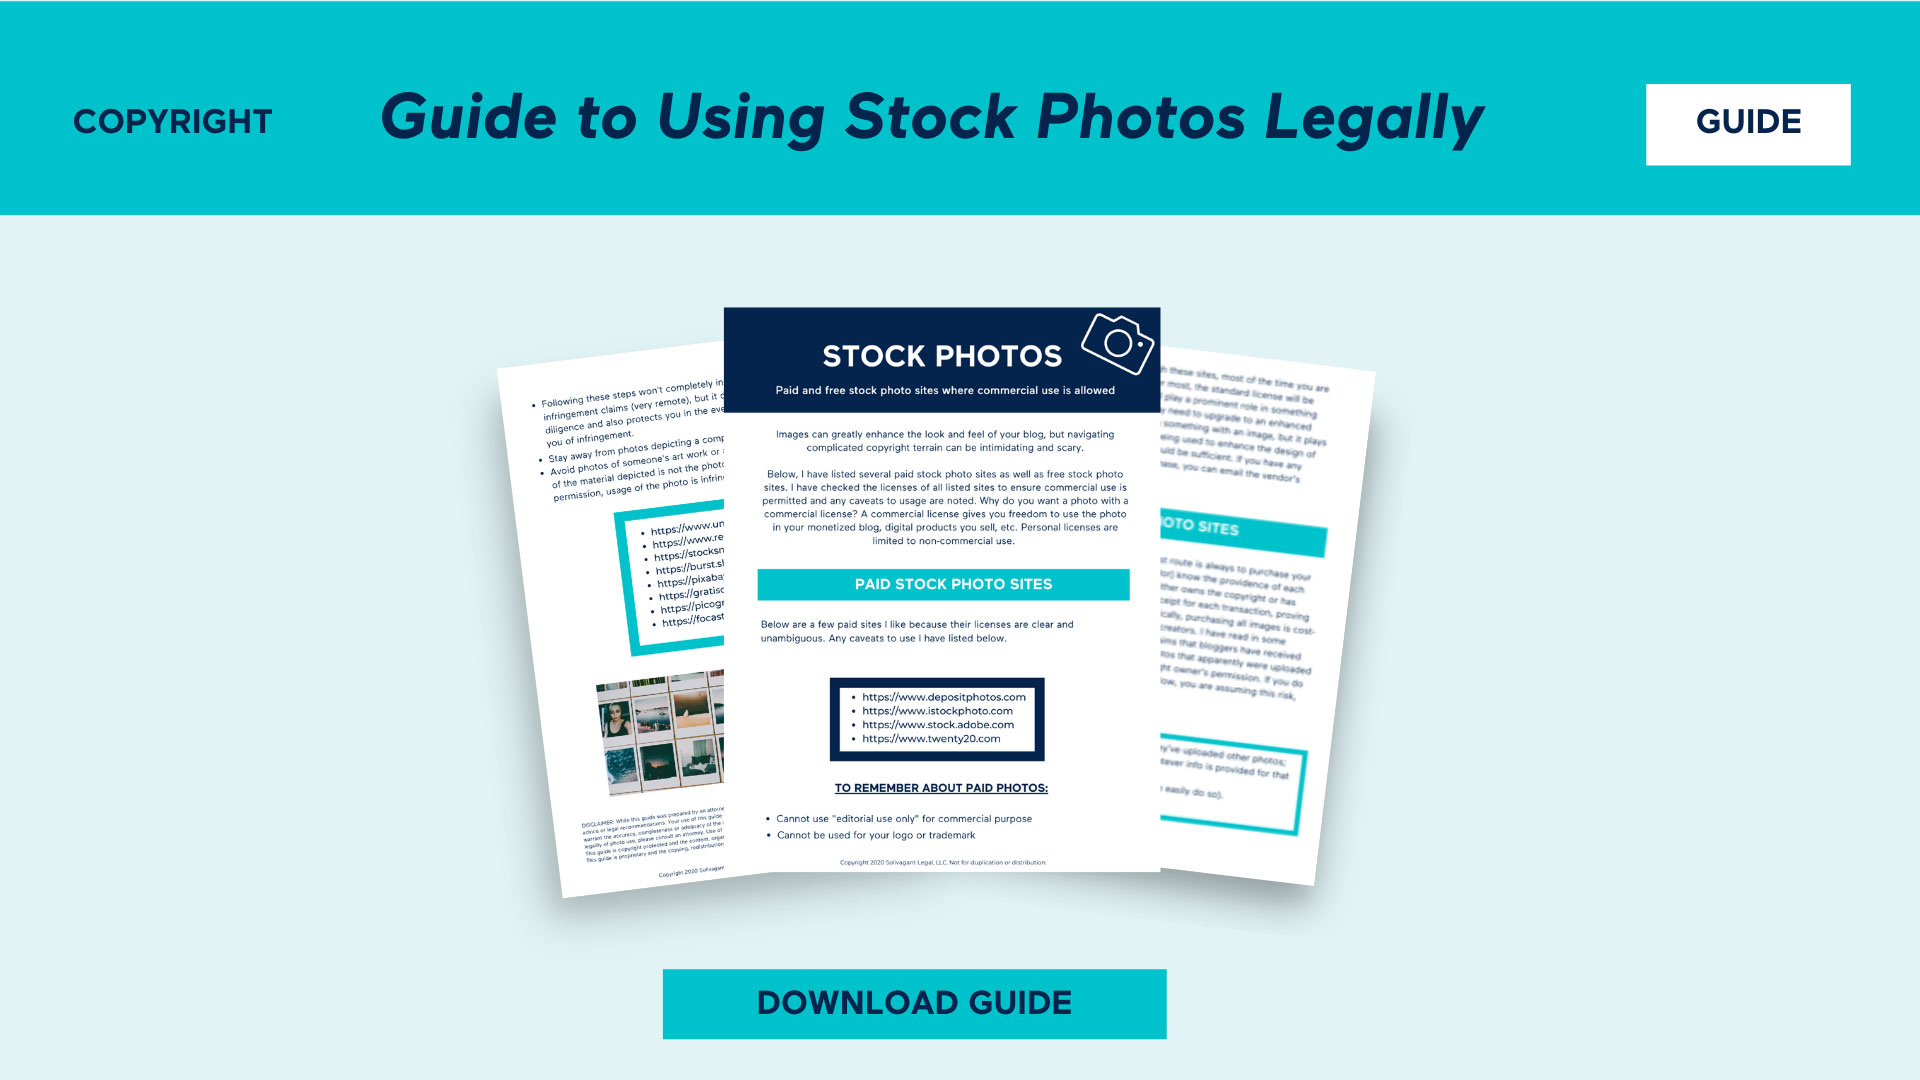 Guide to Using Stock Photos Legally